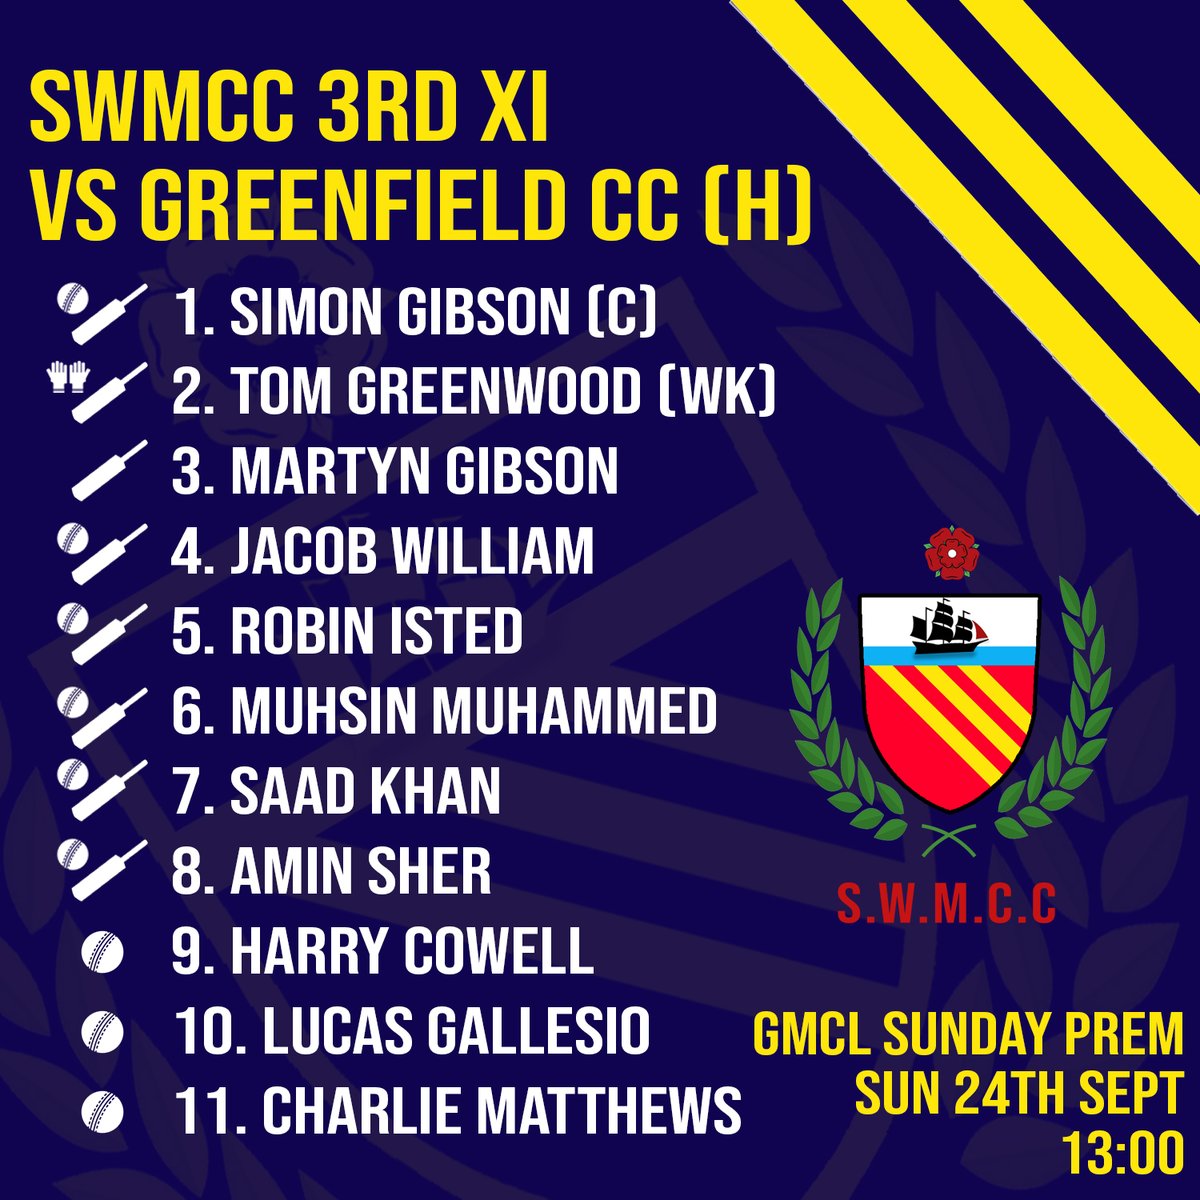 For one last time this season, here's how we line-up today

3rds vs @Greenfield_C_C (H)

#SWMCC #Cricket #ClubCricket #Chorlton #SouthManchester